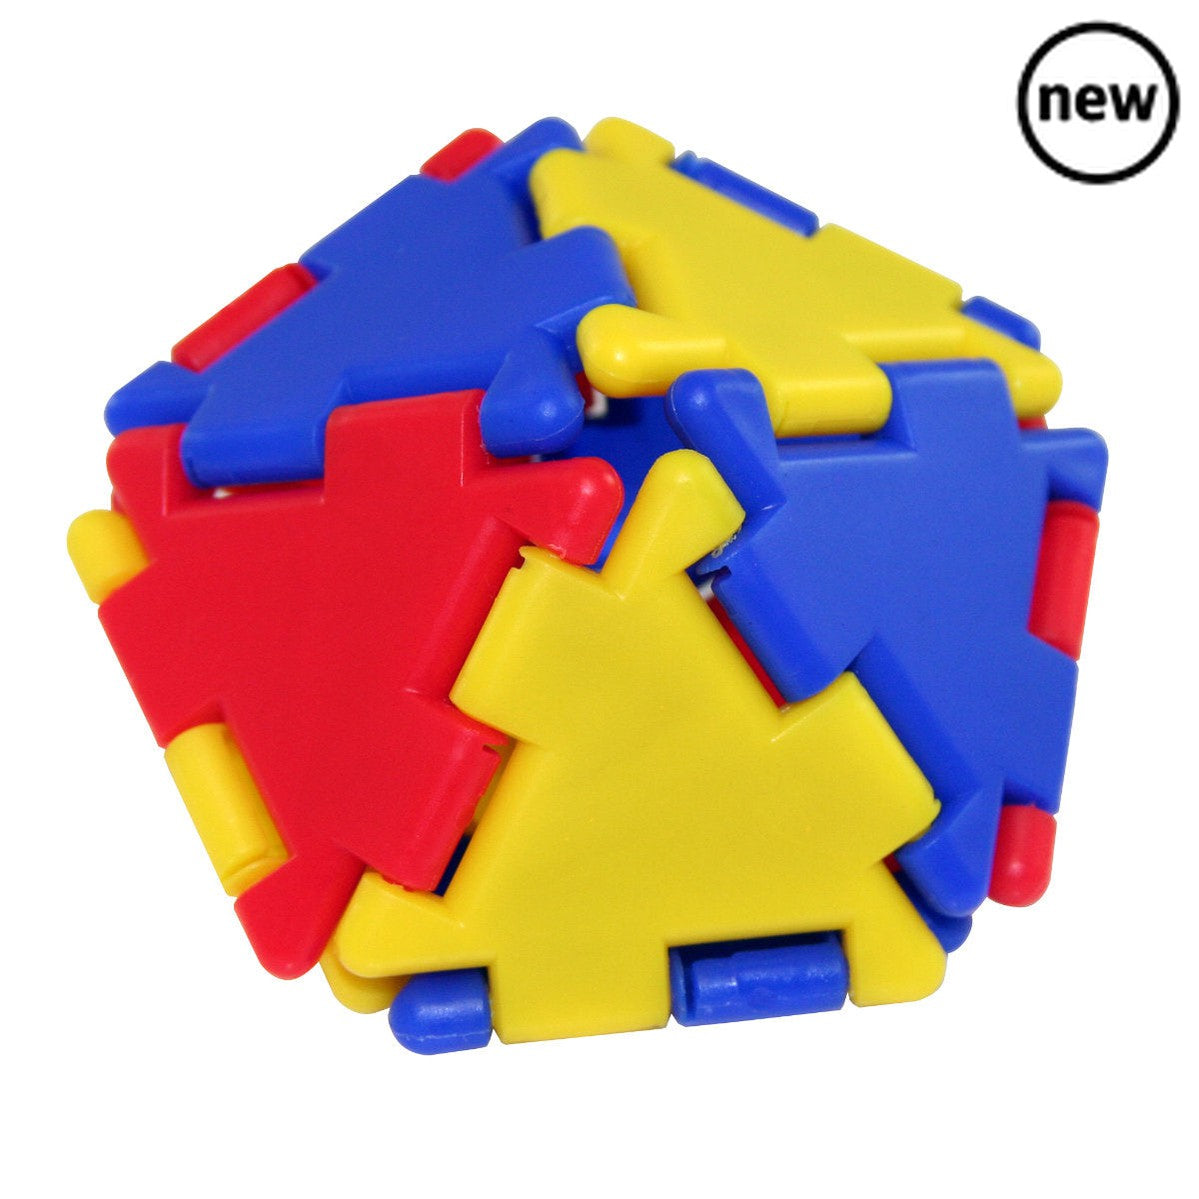 Junior Polydron Class Set, Introducing the Junior Polydron Class set - the perfect companion for classrooms filled with young and aspiring builders. With its soft pieces and vibrant colors, this set is specifically designed to captivate the imagination of children as they create their very first models.This comprehensive Junior Polydron Class Set comprises a whopping 372 pieces, including 90 triangles, 180 squares, 36 spacers, 12 wheels, 18 axles in two different sizes, and an assortment of 18 child and adu